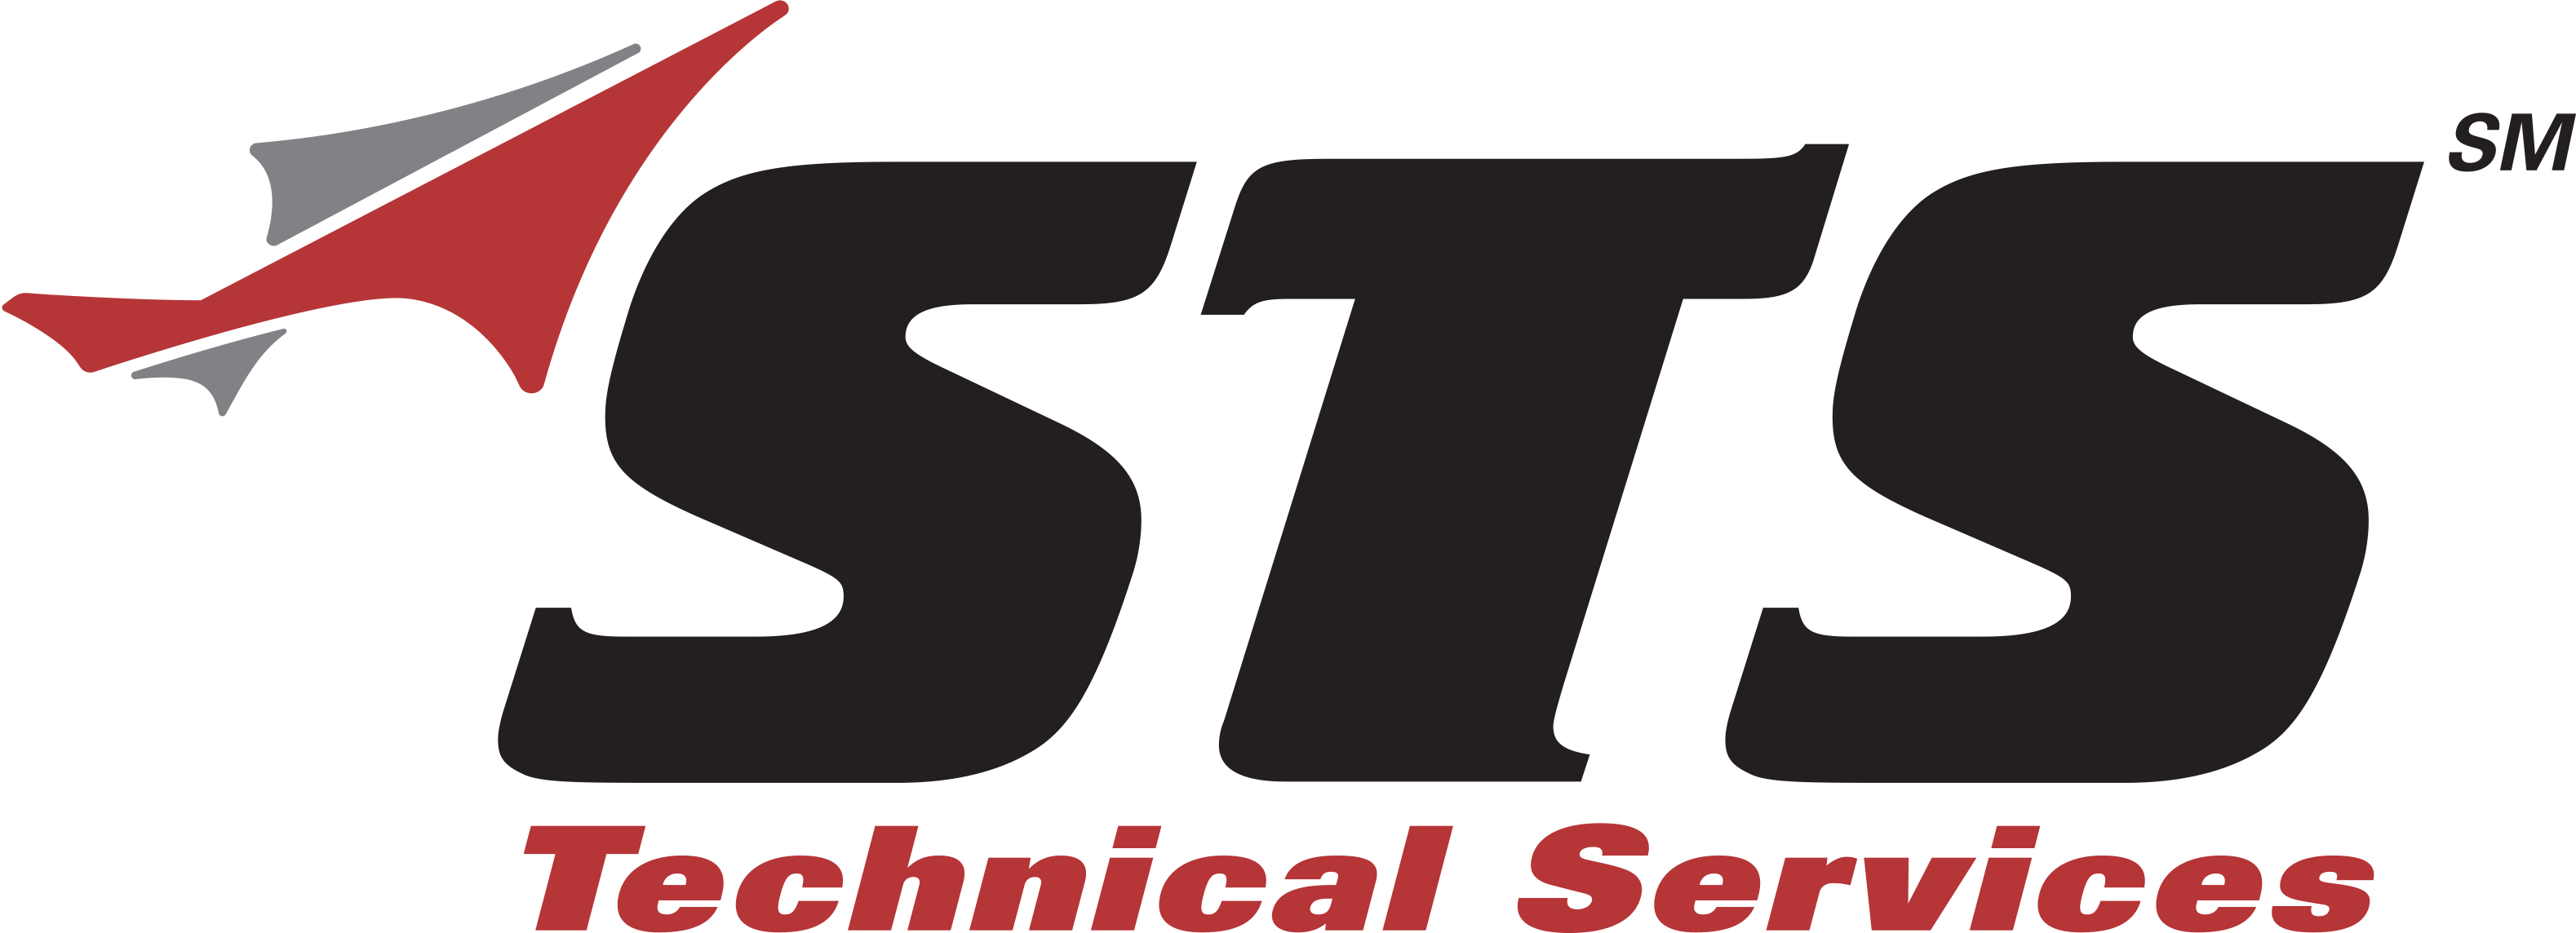 STS Technical Services Company Logo